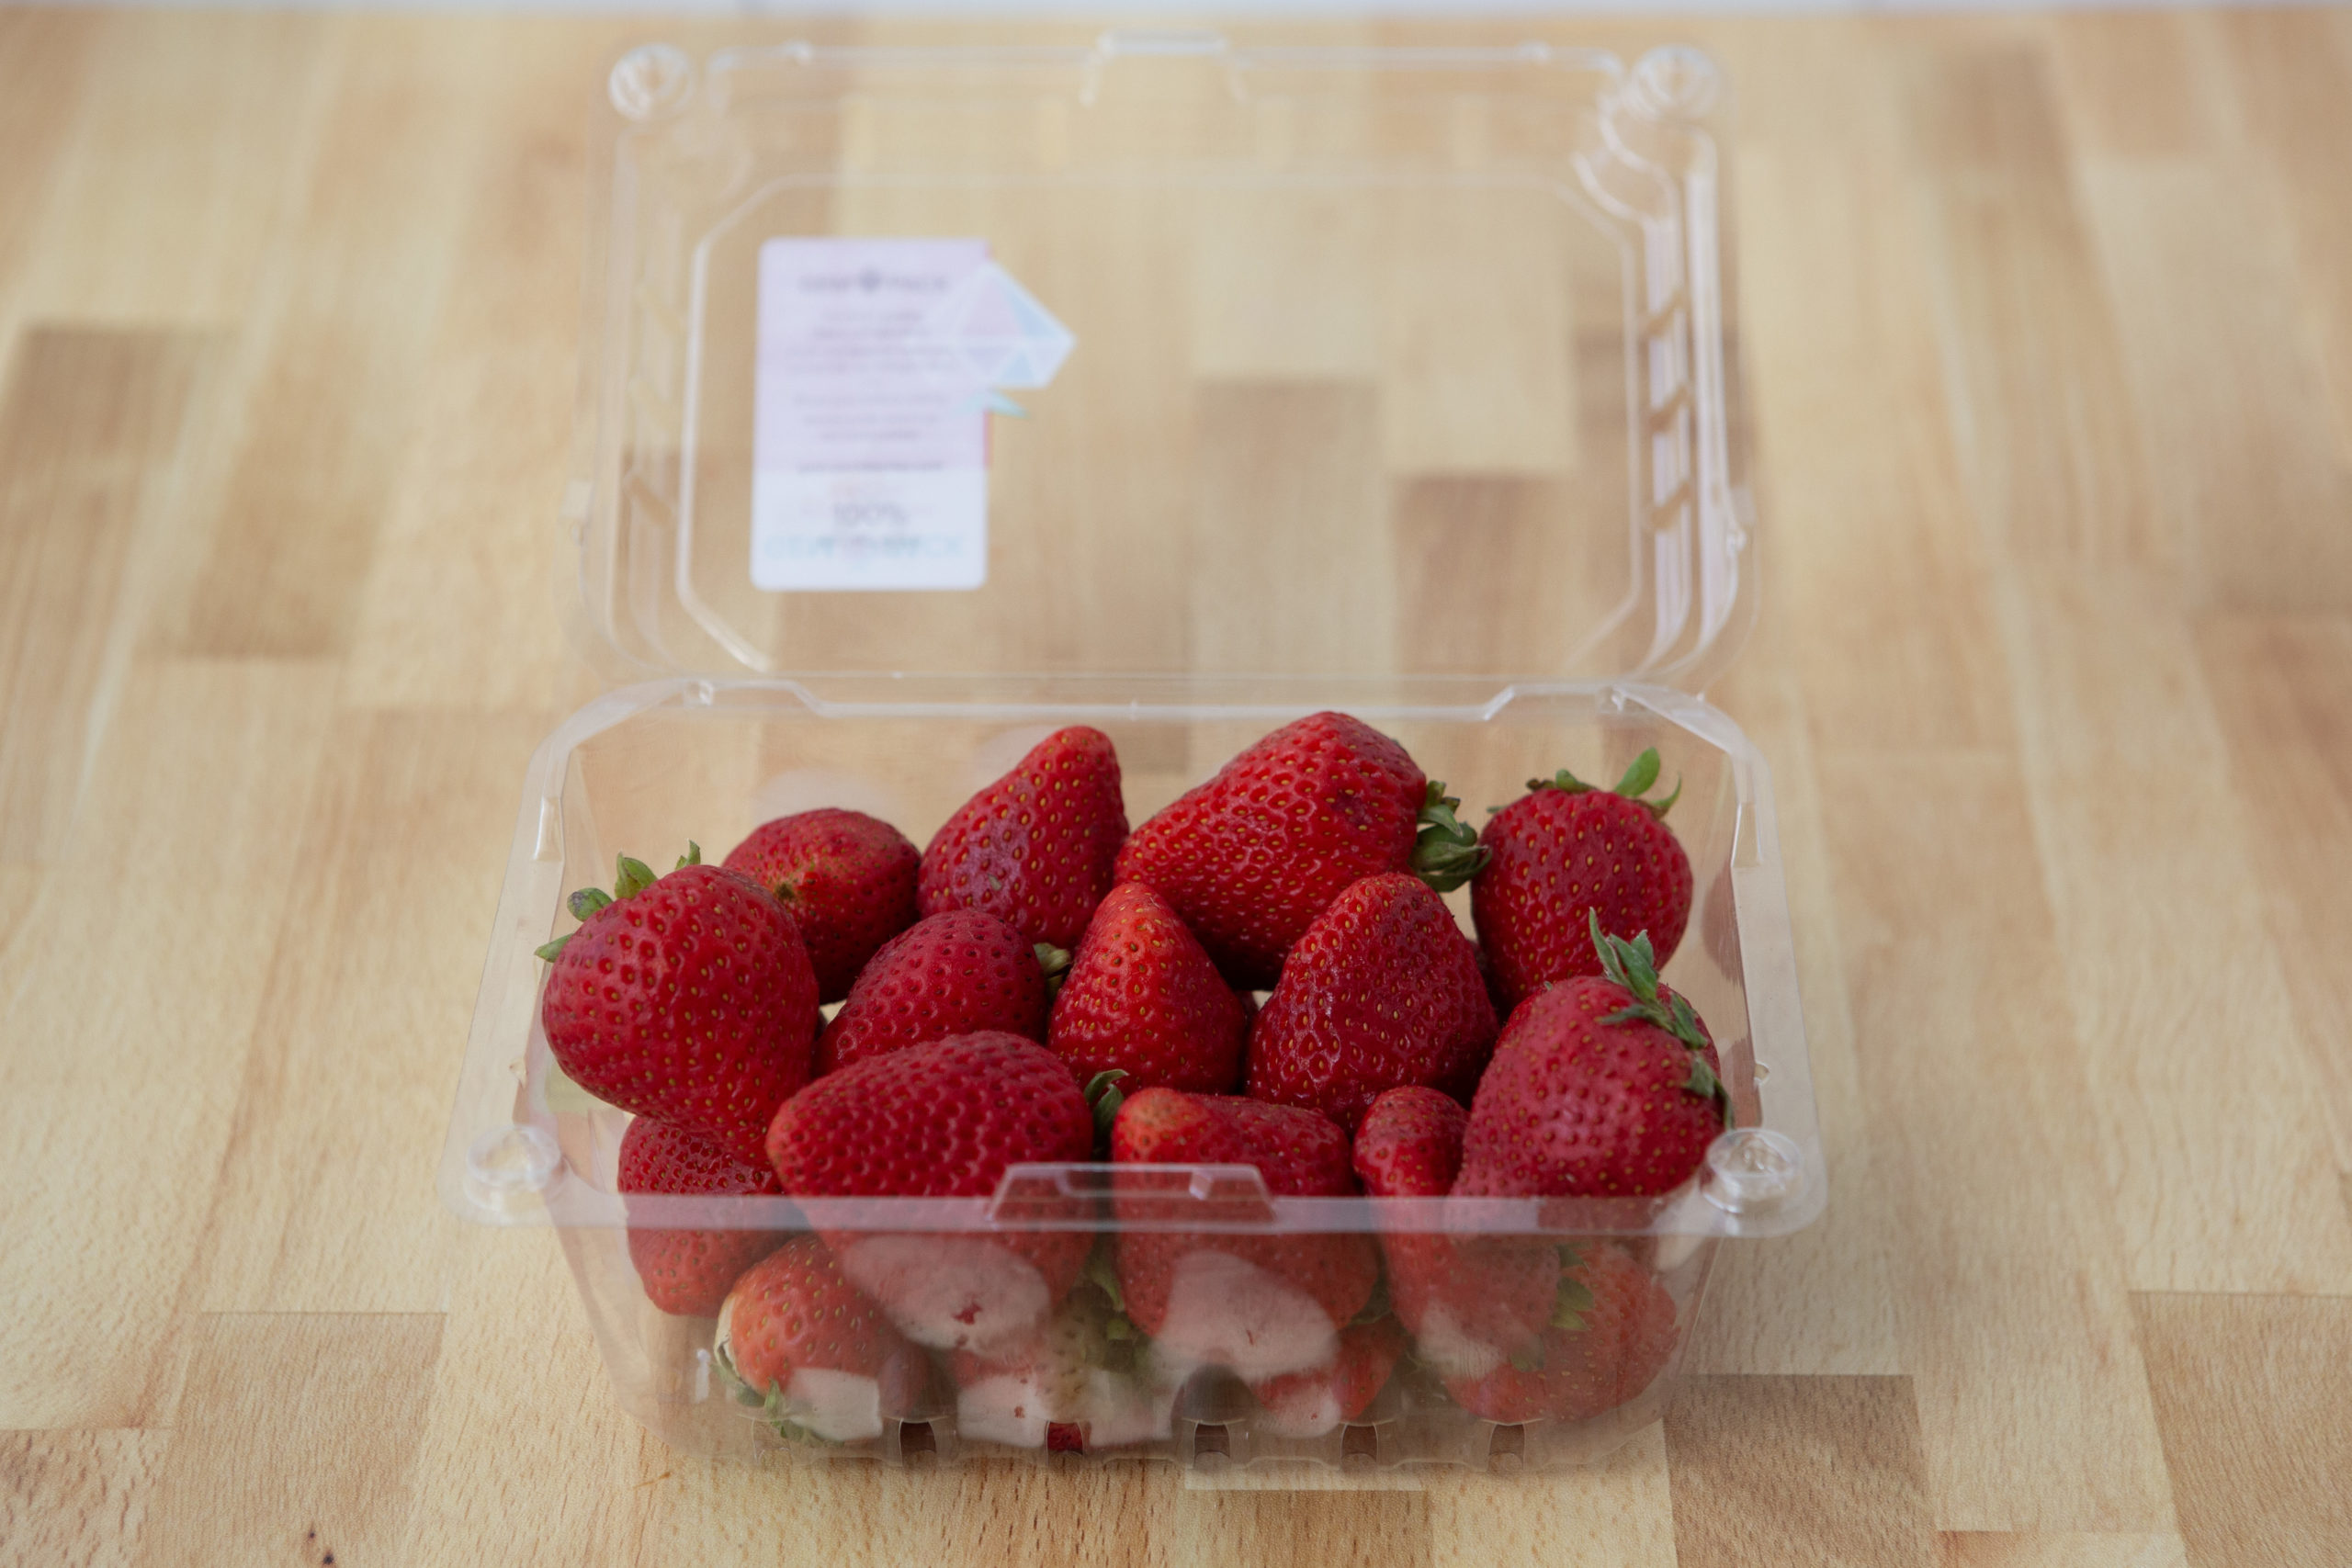 strawberries in plastic container